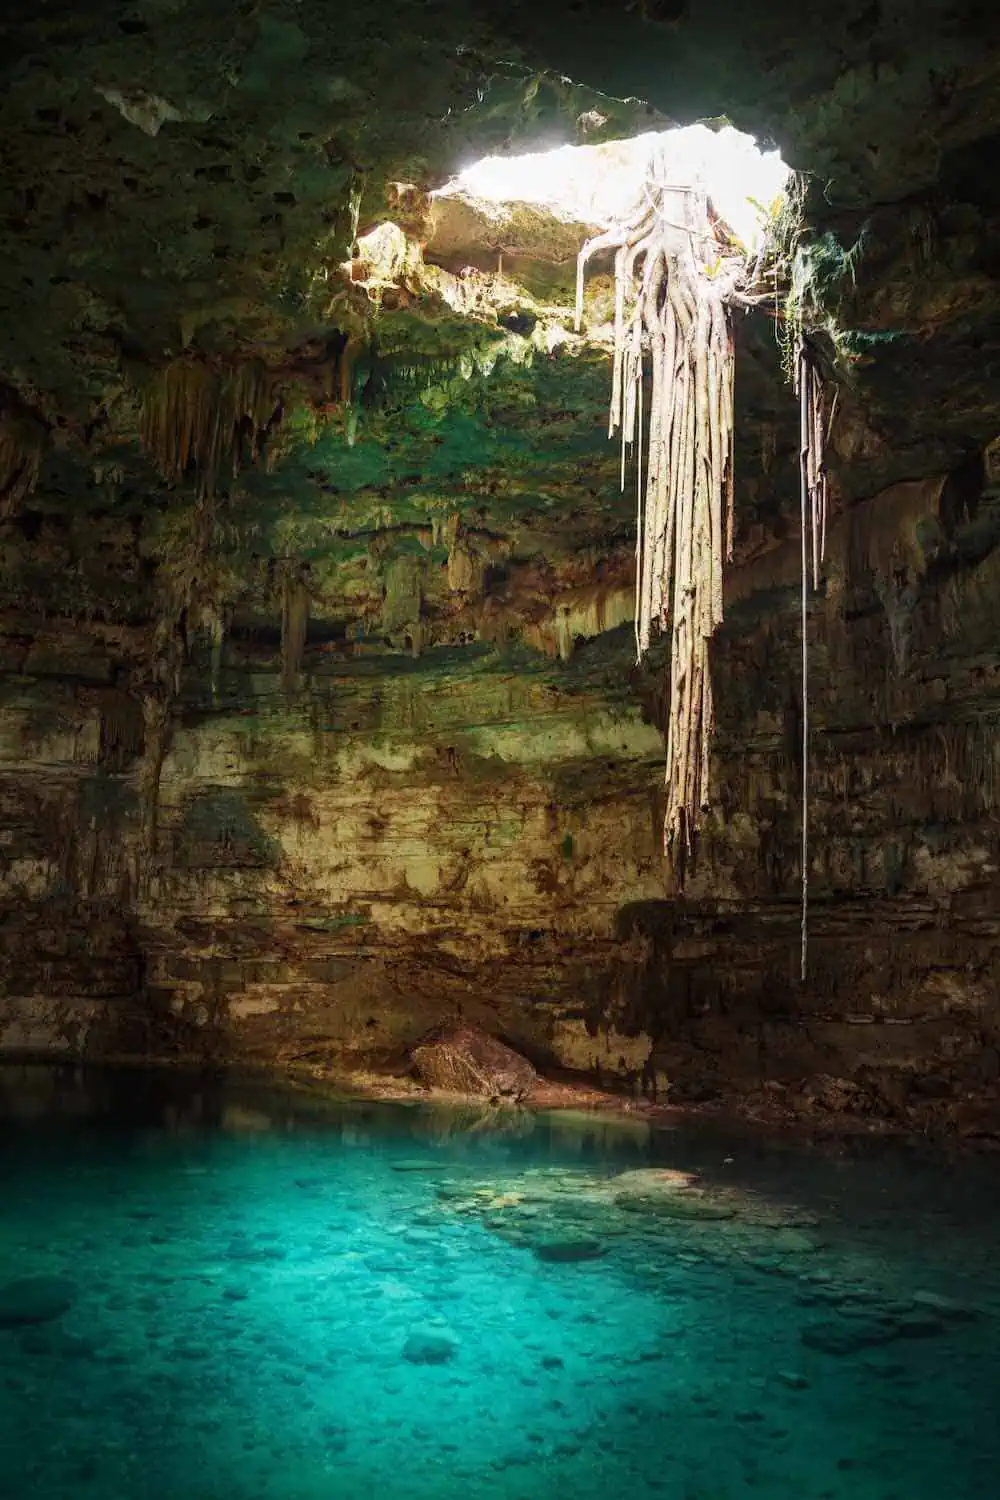 Ik-Kil a blue cenote with opening. 